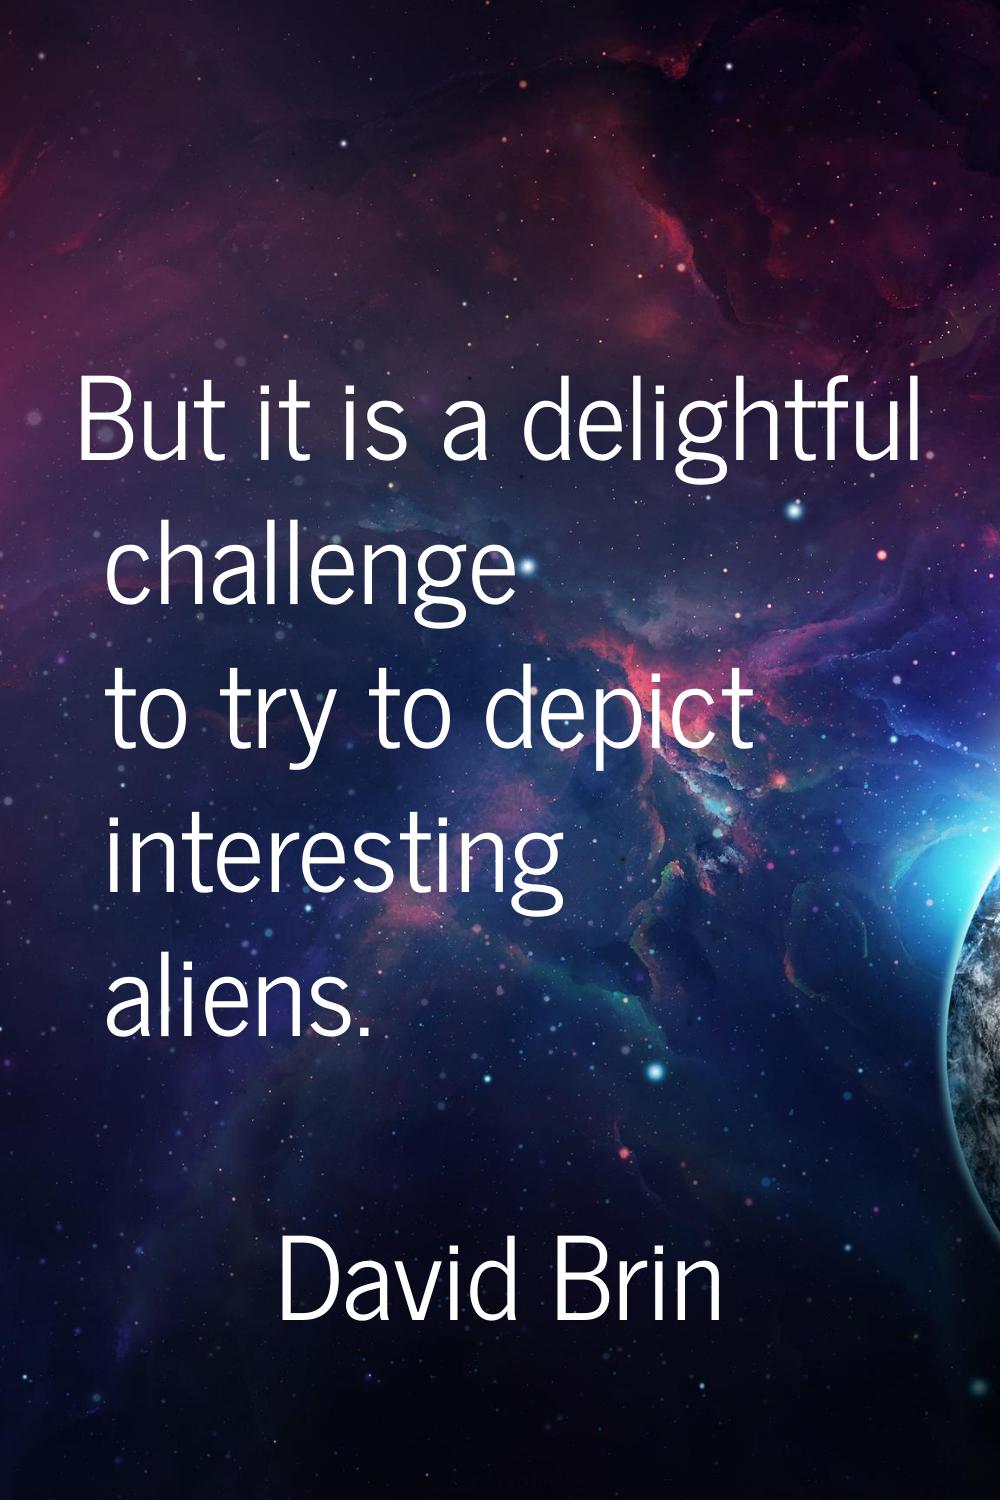 But it is a delightful challenge to try to depict interesting aliens.